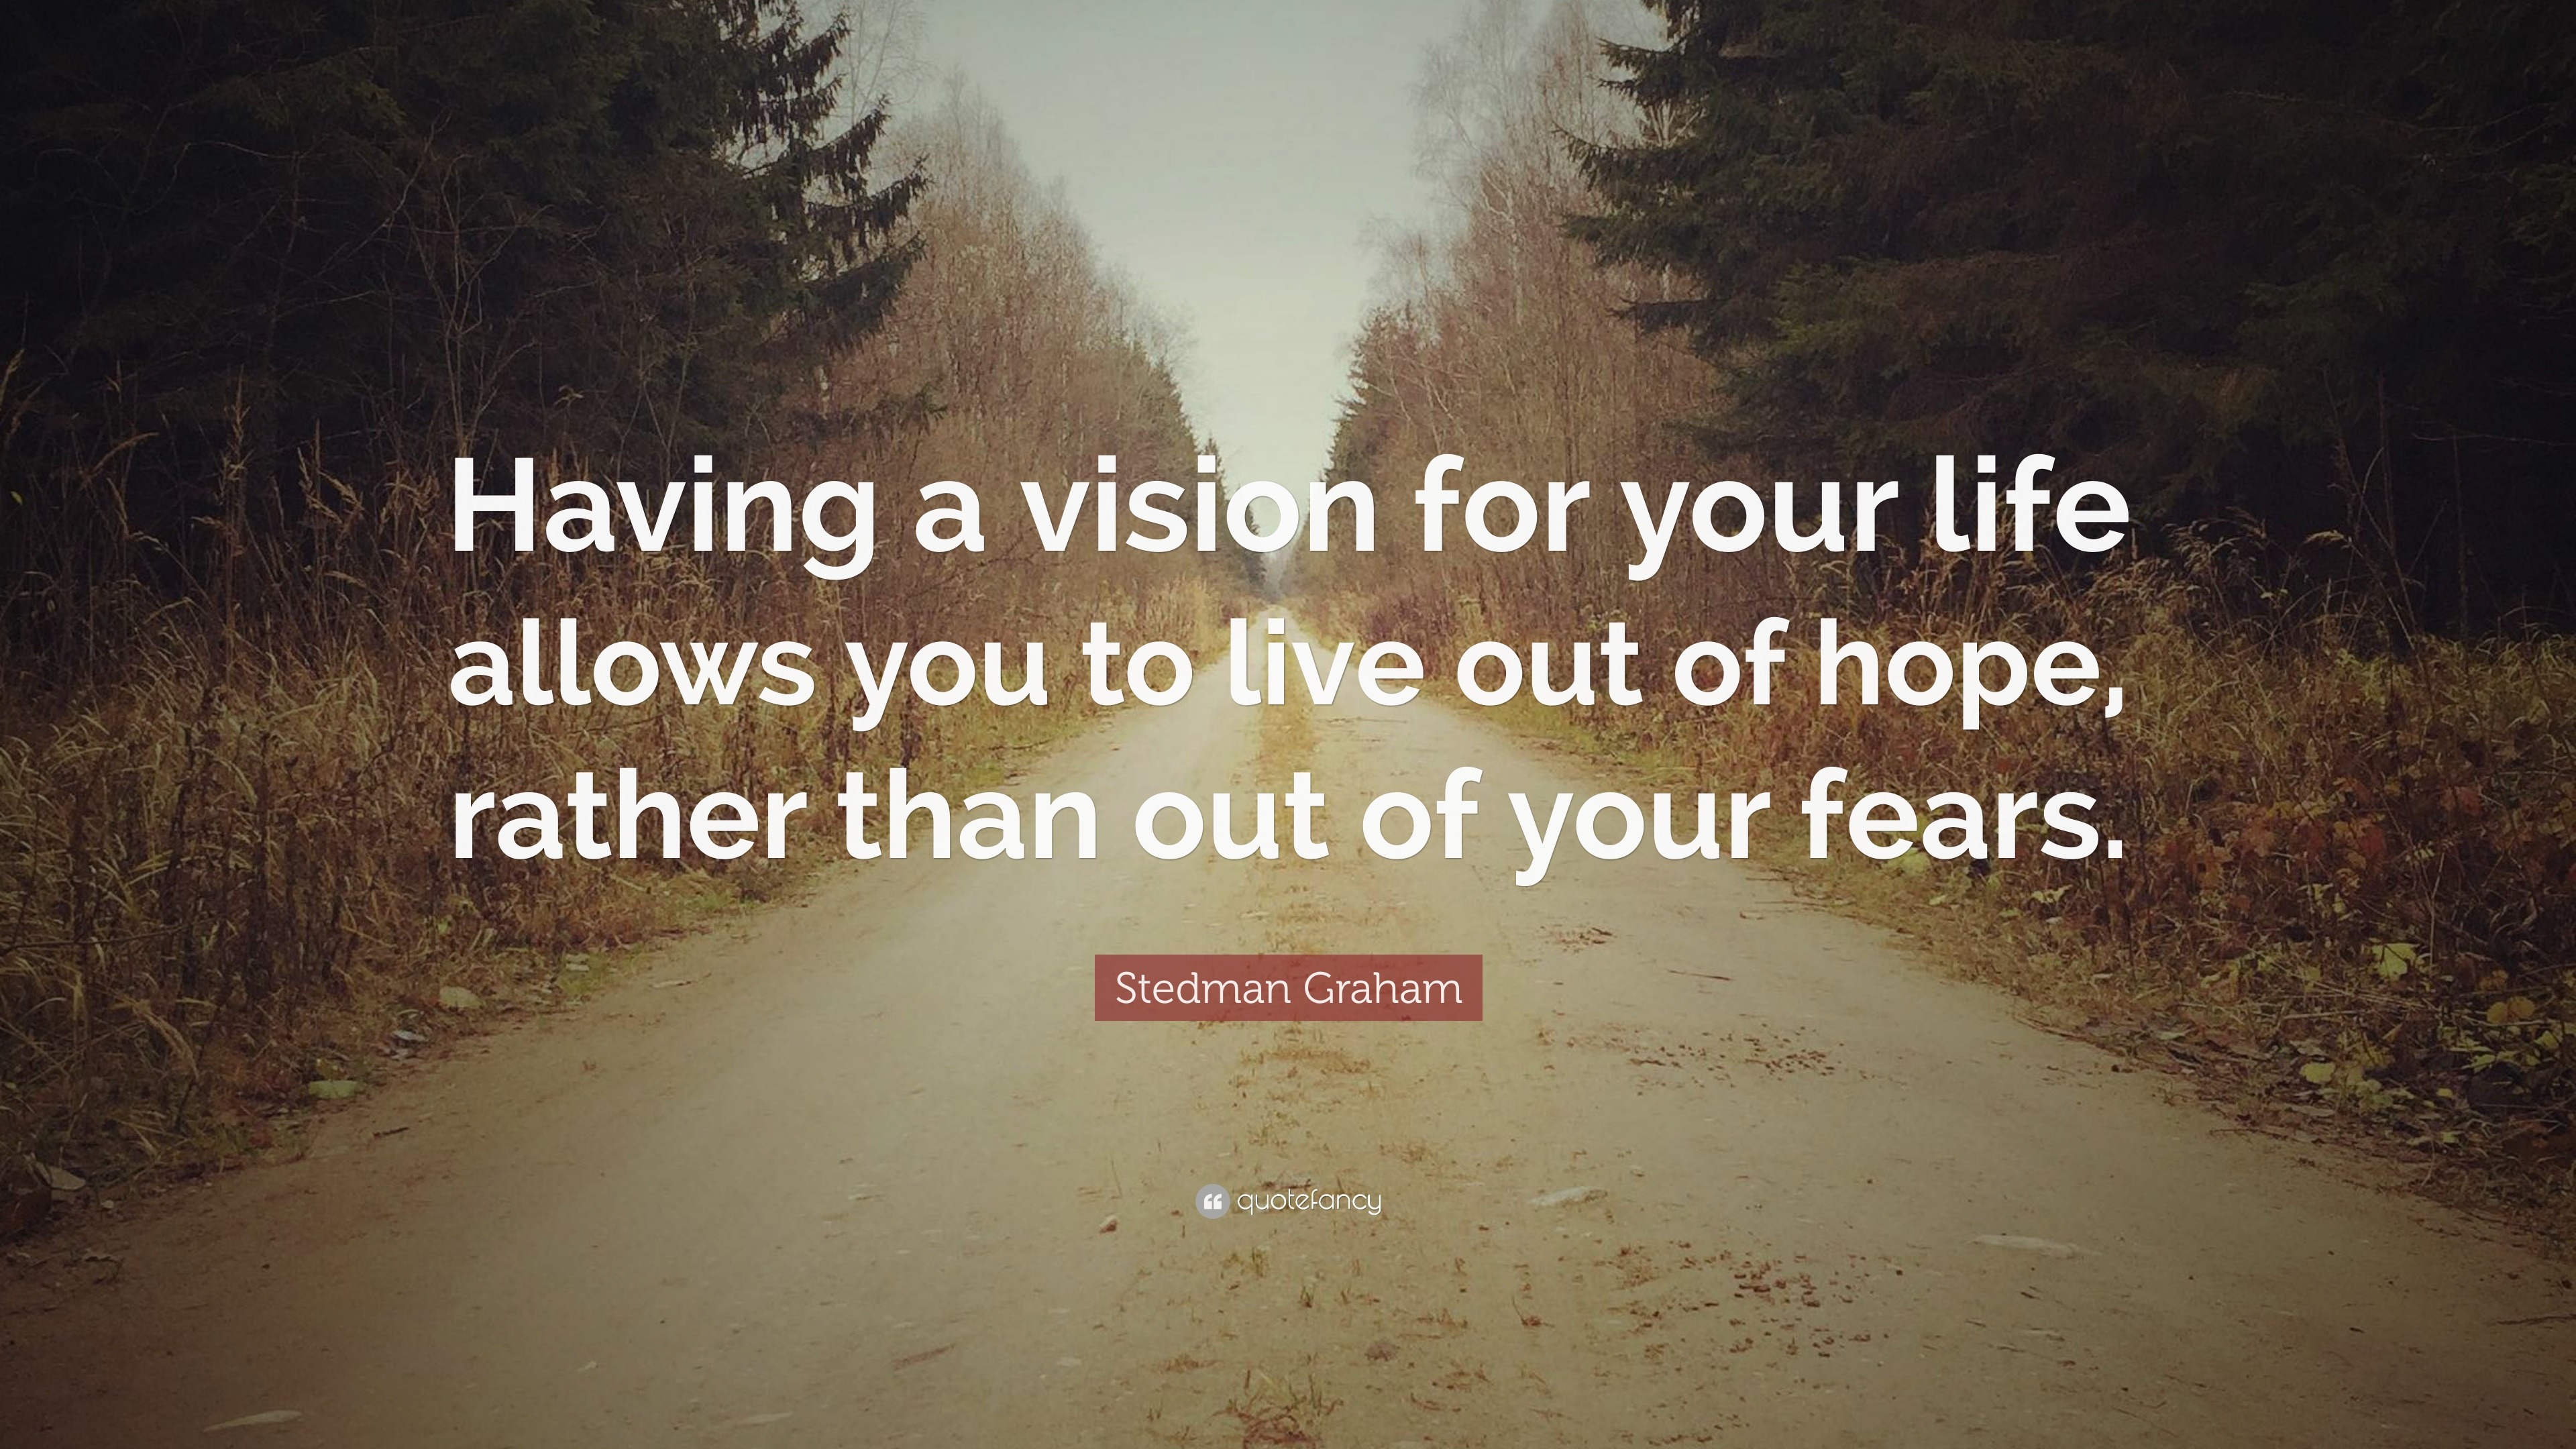 Stedman Graham Quote “Having a vision for your life